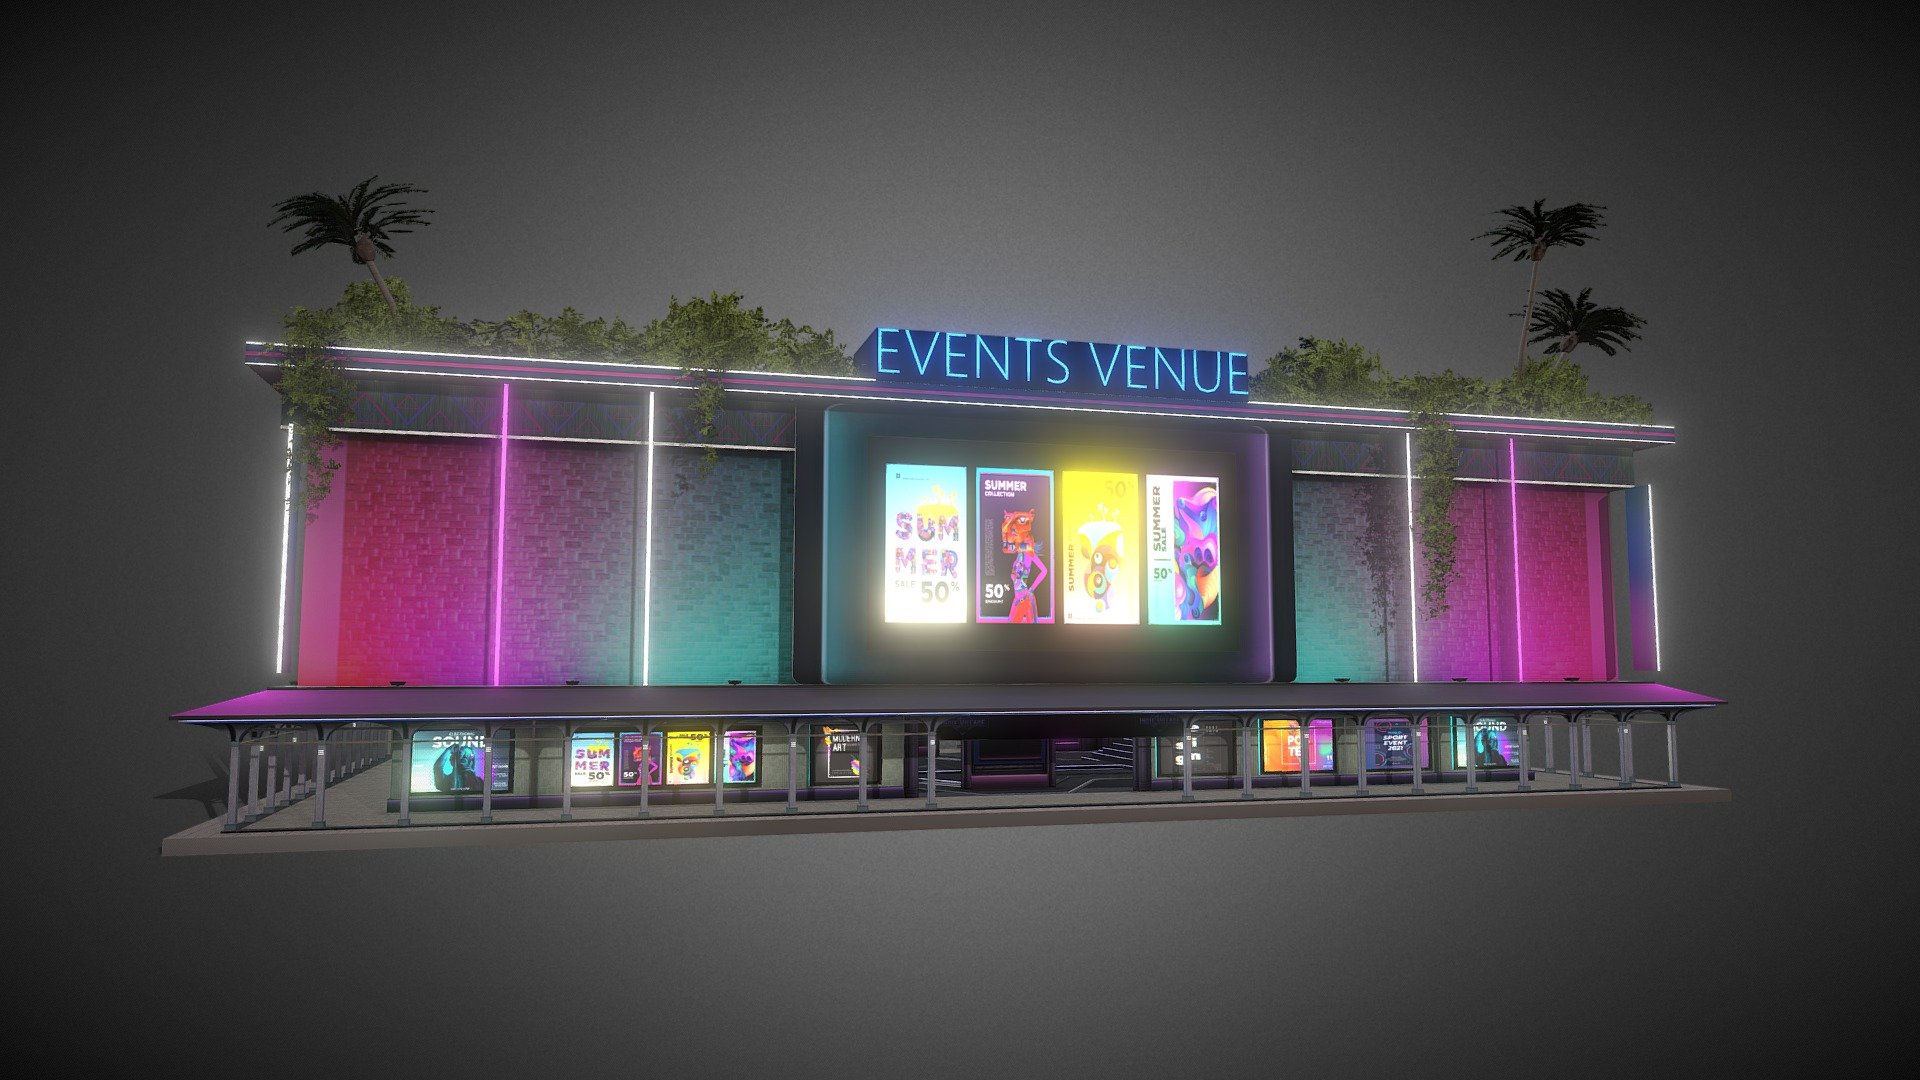 The Events Venue is a generic brand building created for Indie Village in Decentraland. It will be used to host a variety of events such as concerts, presentations and metaverse brand activations.

Jump in at DCL coordinates 100,30. 

https://play.decentraland.org/?position=100%2C30

Created by FGR3D of Low Poly Models 3d model